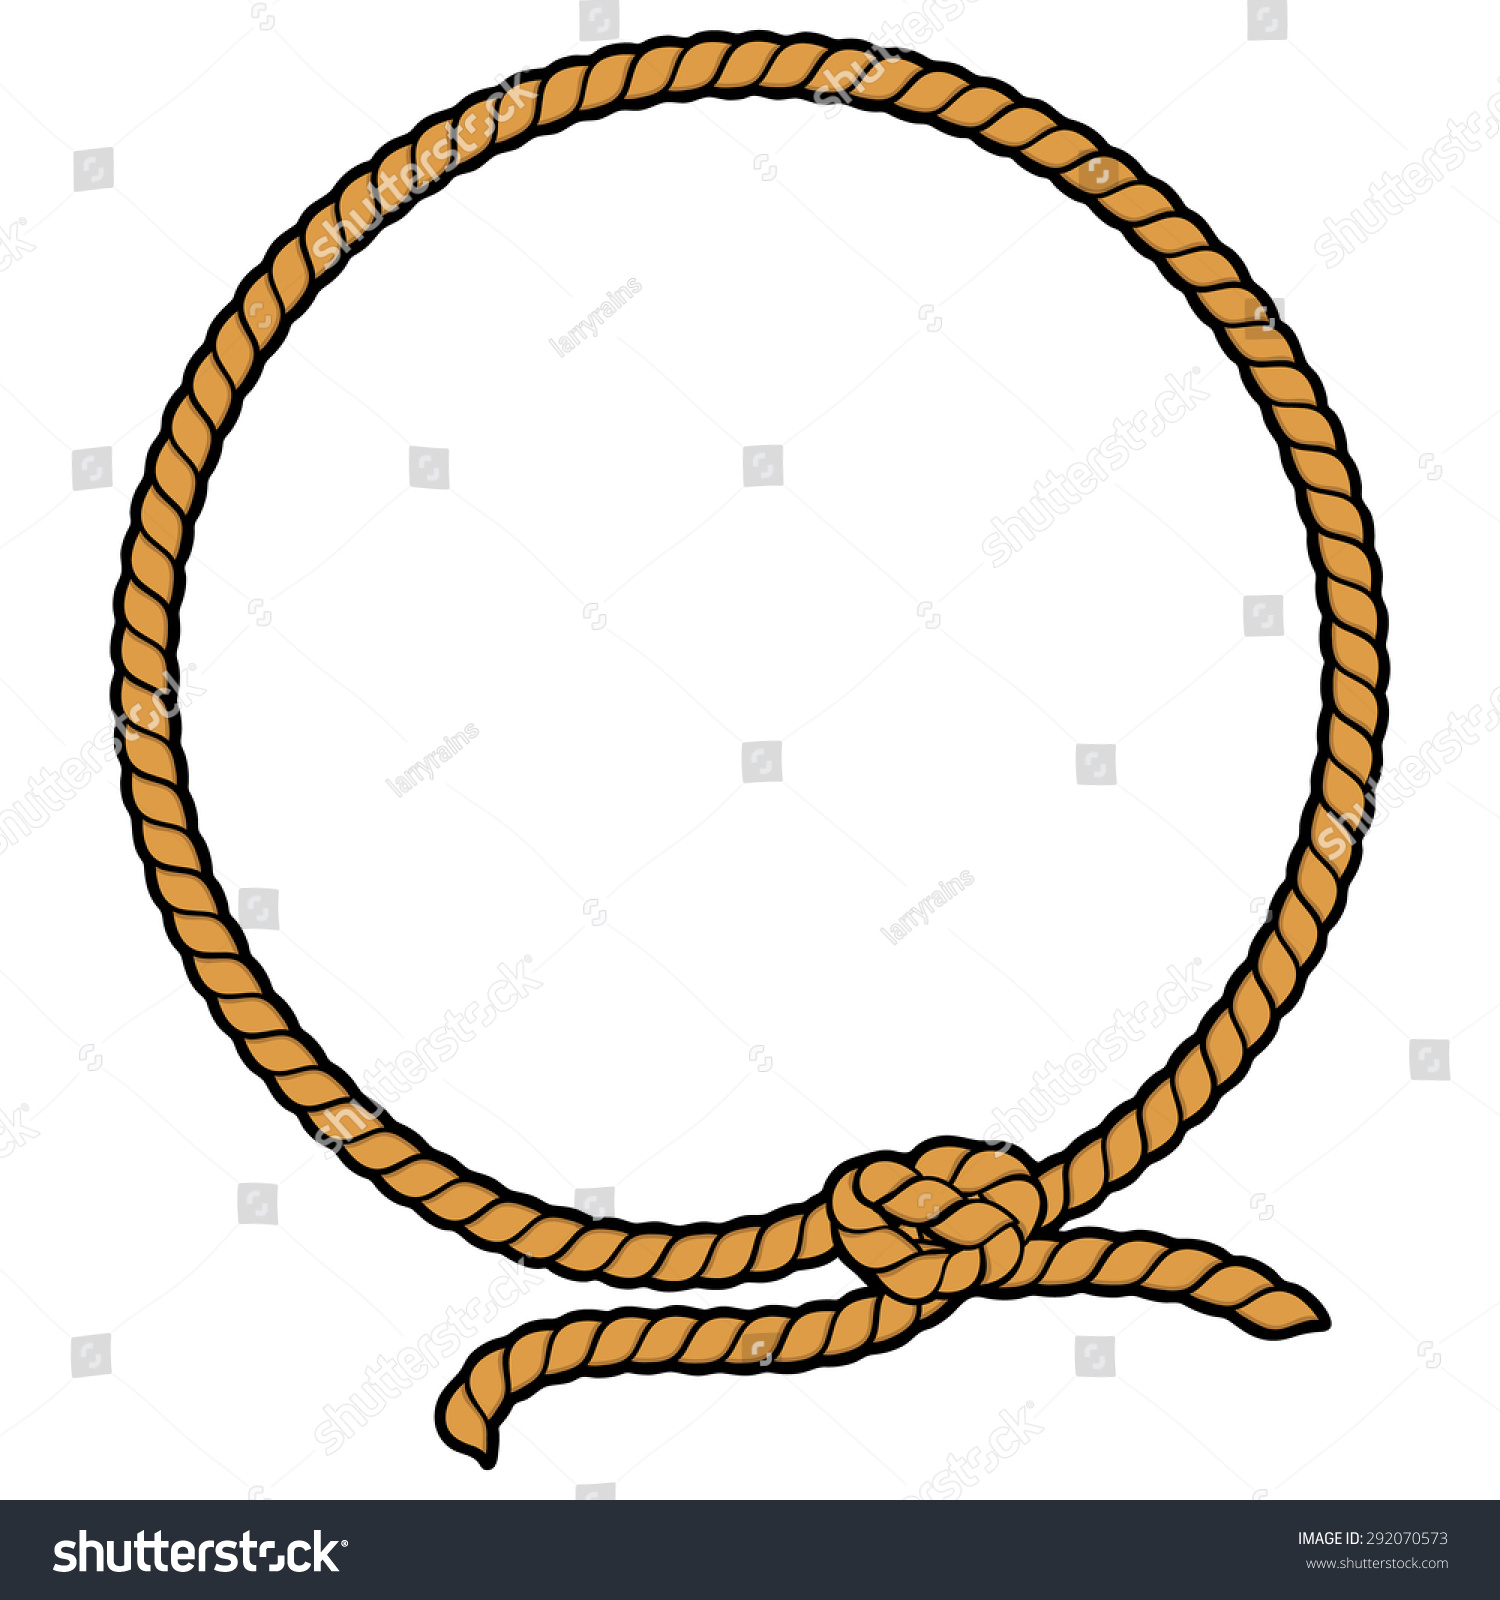 rope clipart vector - photo #34